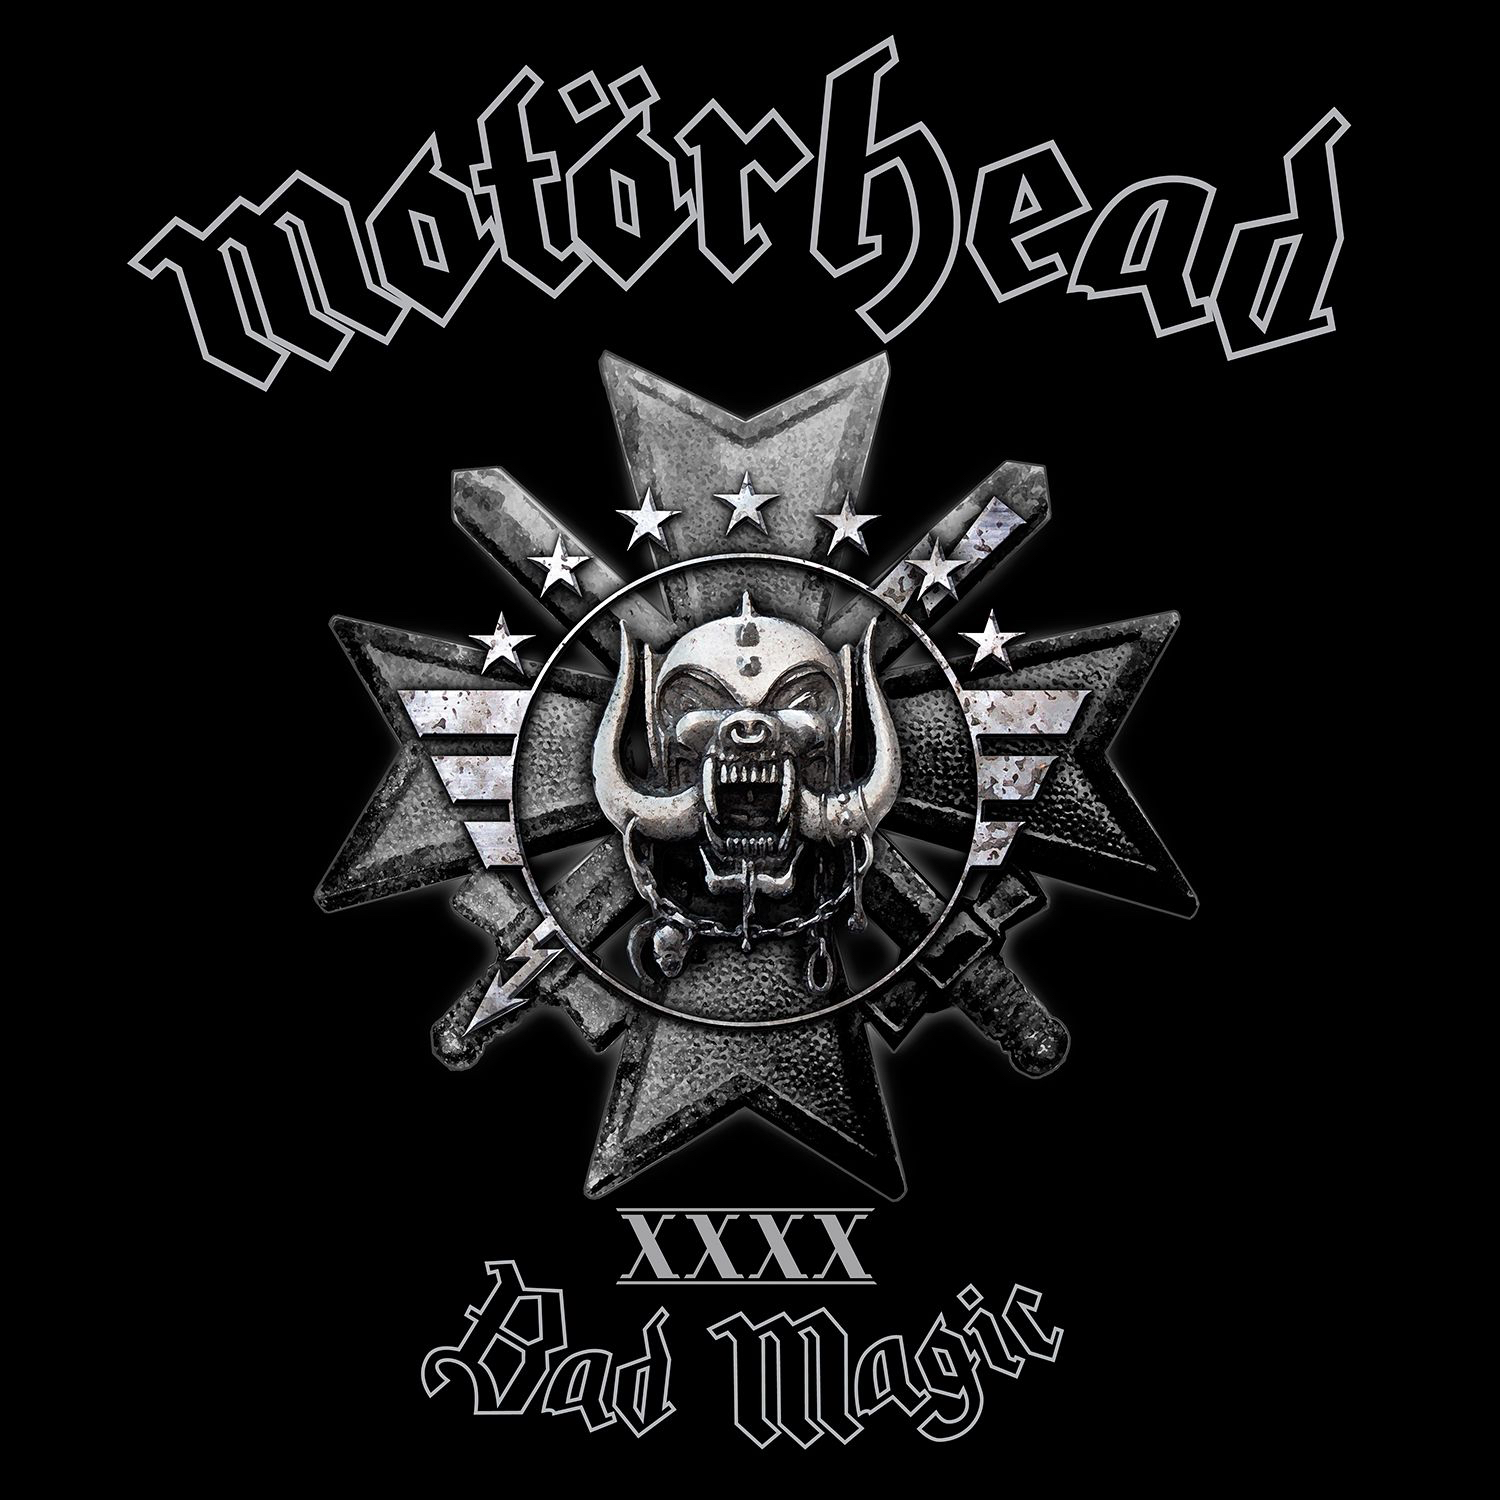 Album cover for "Bad Magic" by Motörhead